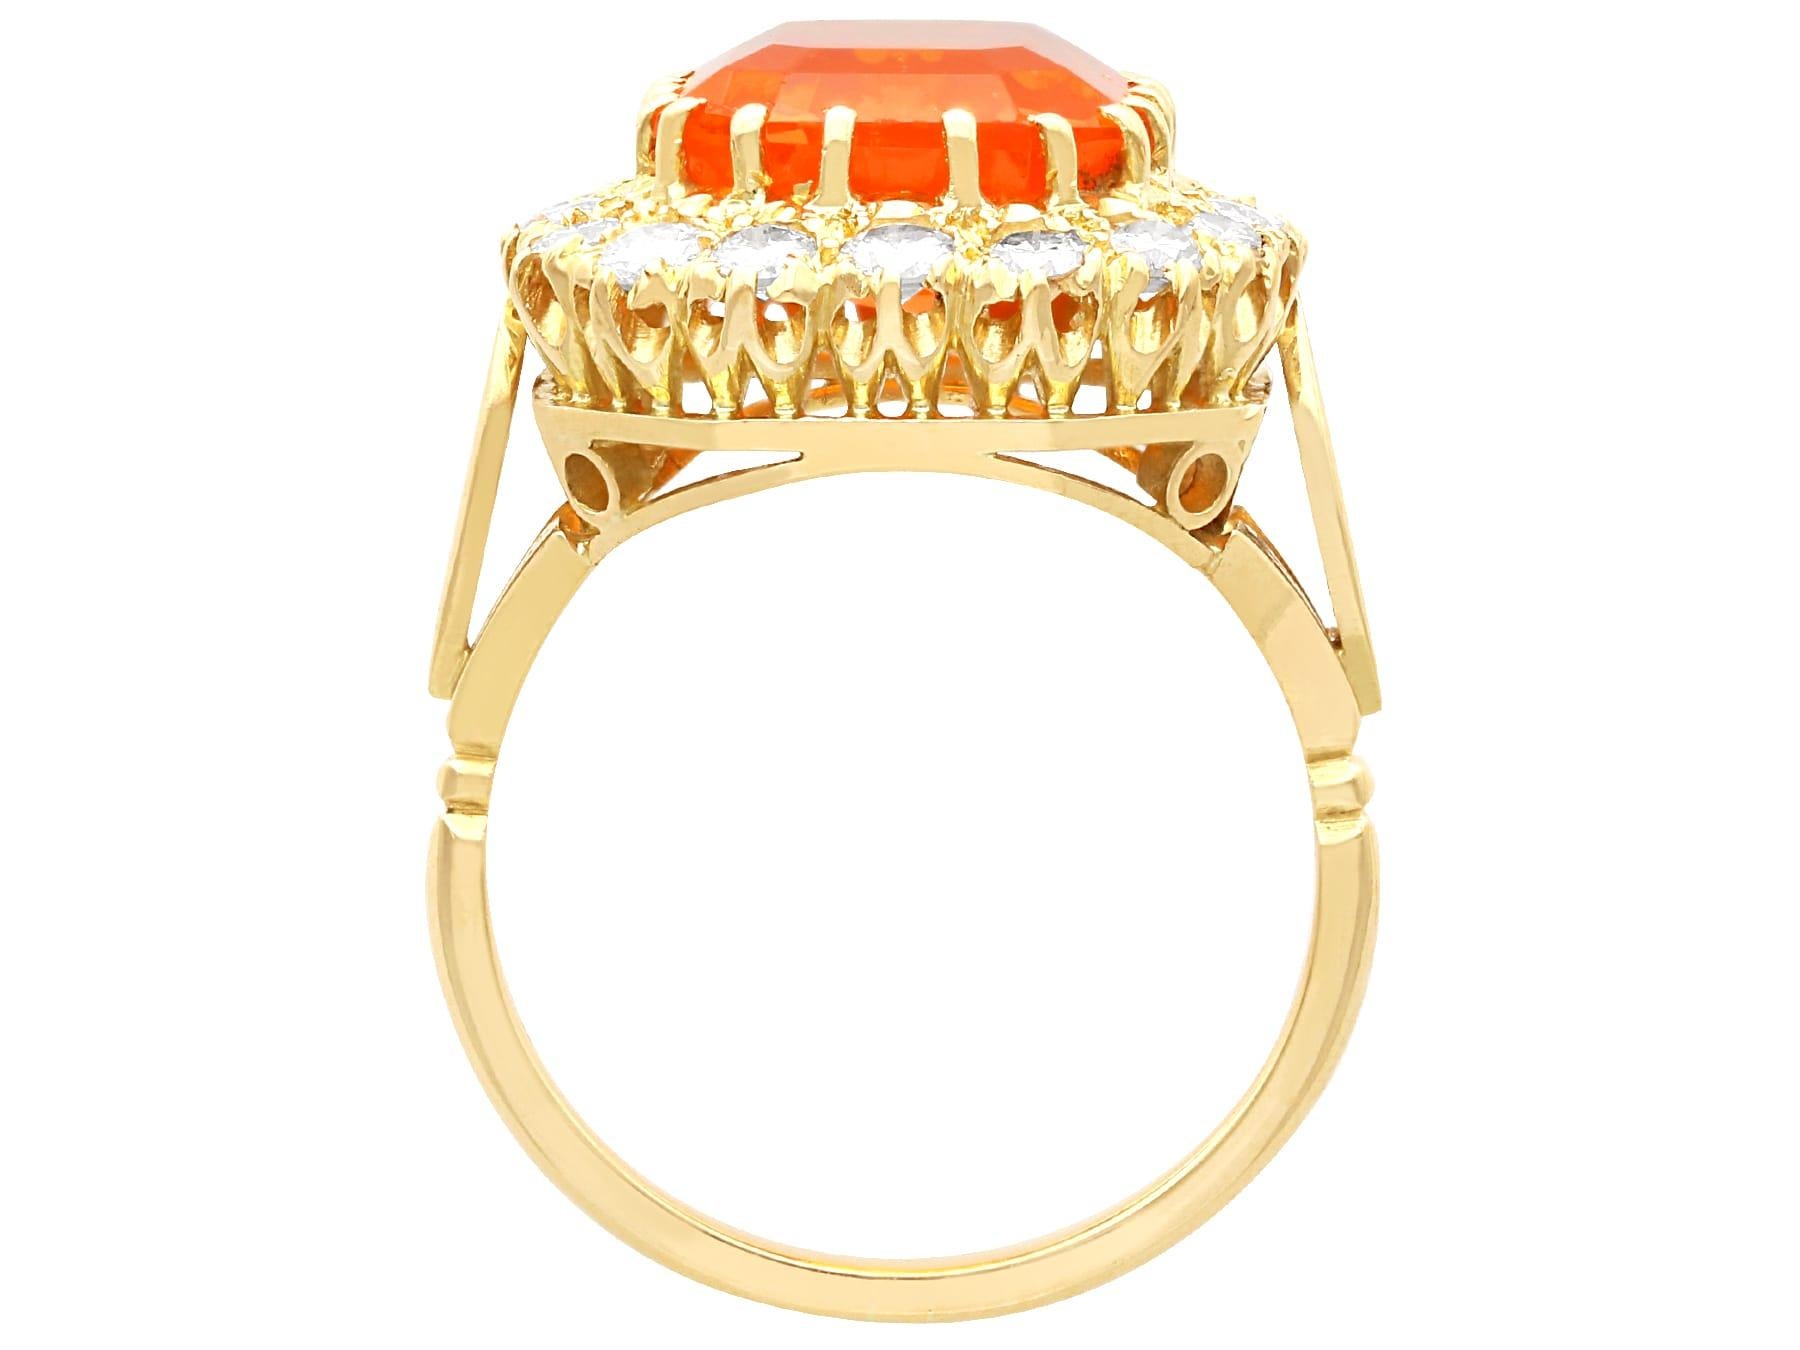 Vintage 4.92 Carat Fire Opal and 1 Carat Diamond 18k Yellow Gold Dress Ring In Excellent Condition For Sale In Jesmond, Newcastle Upon Tyne